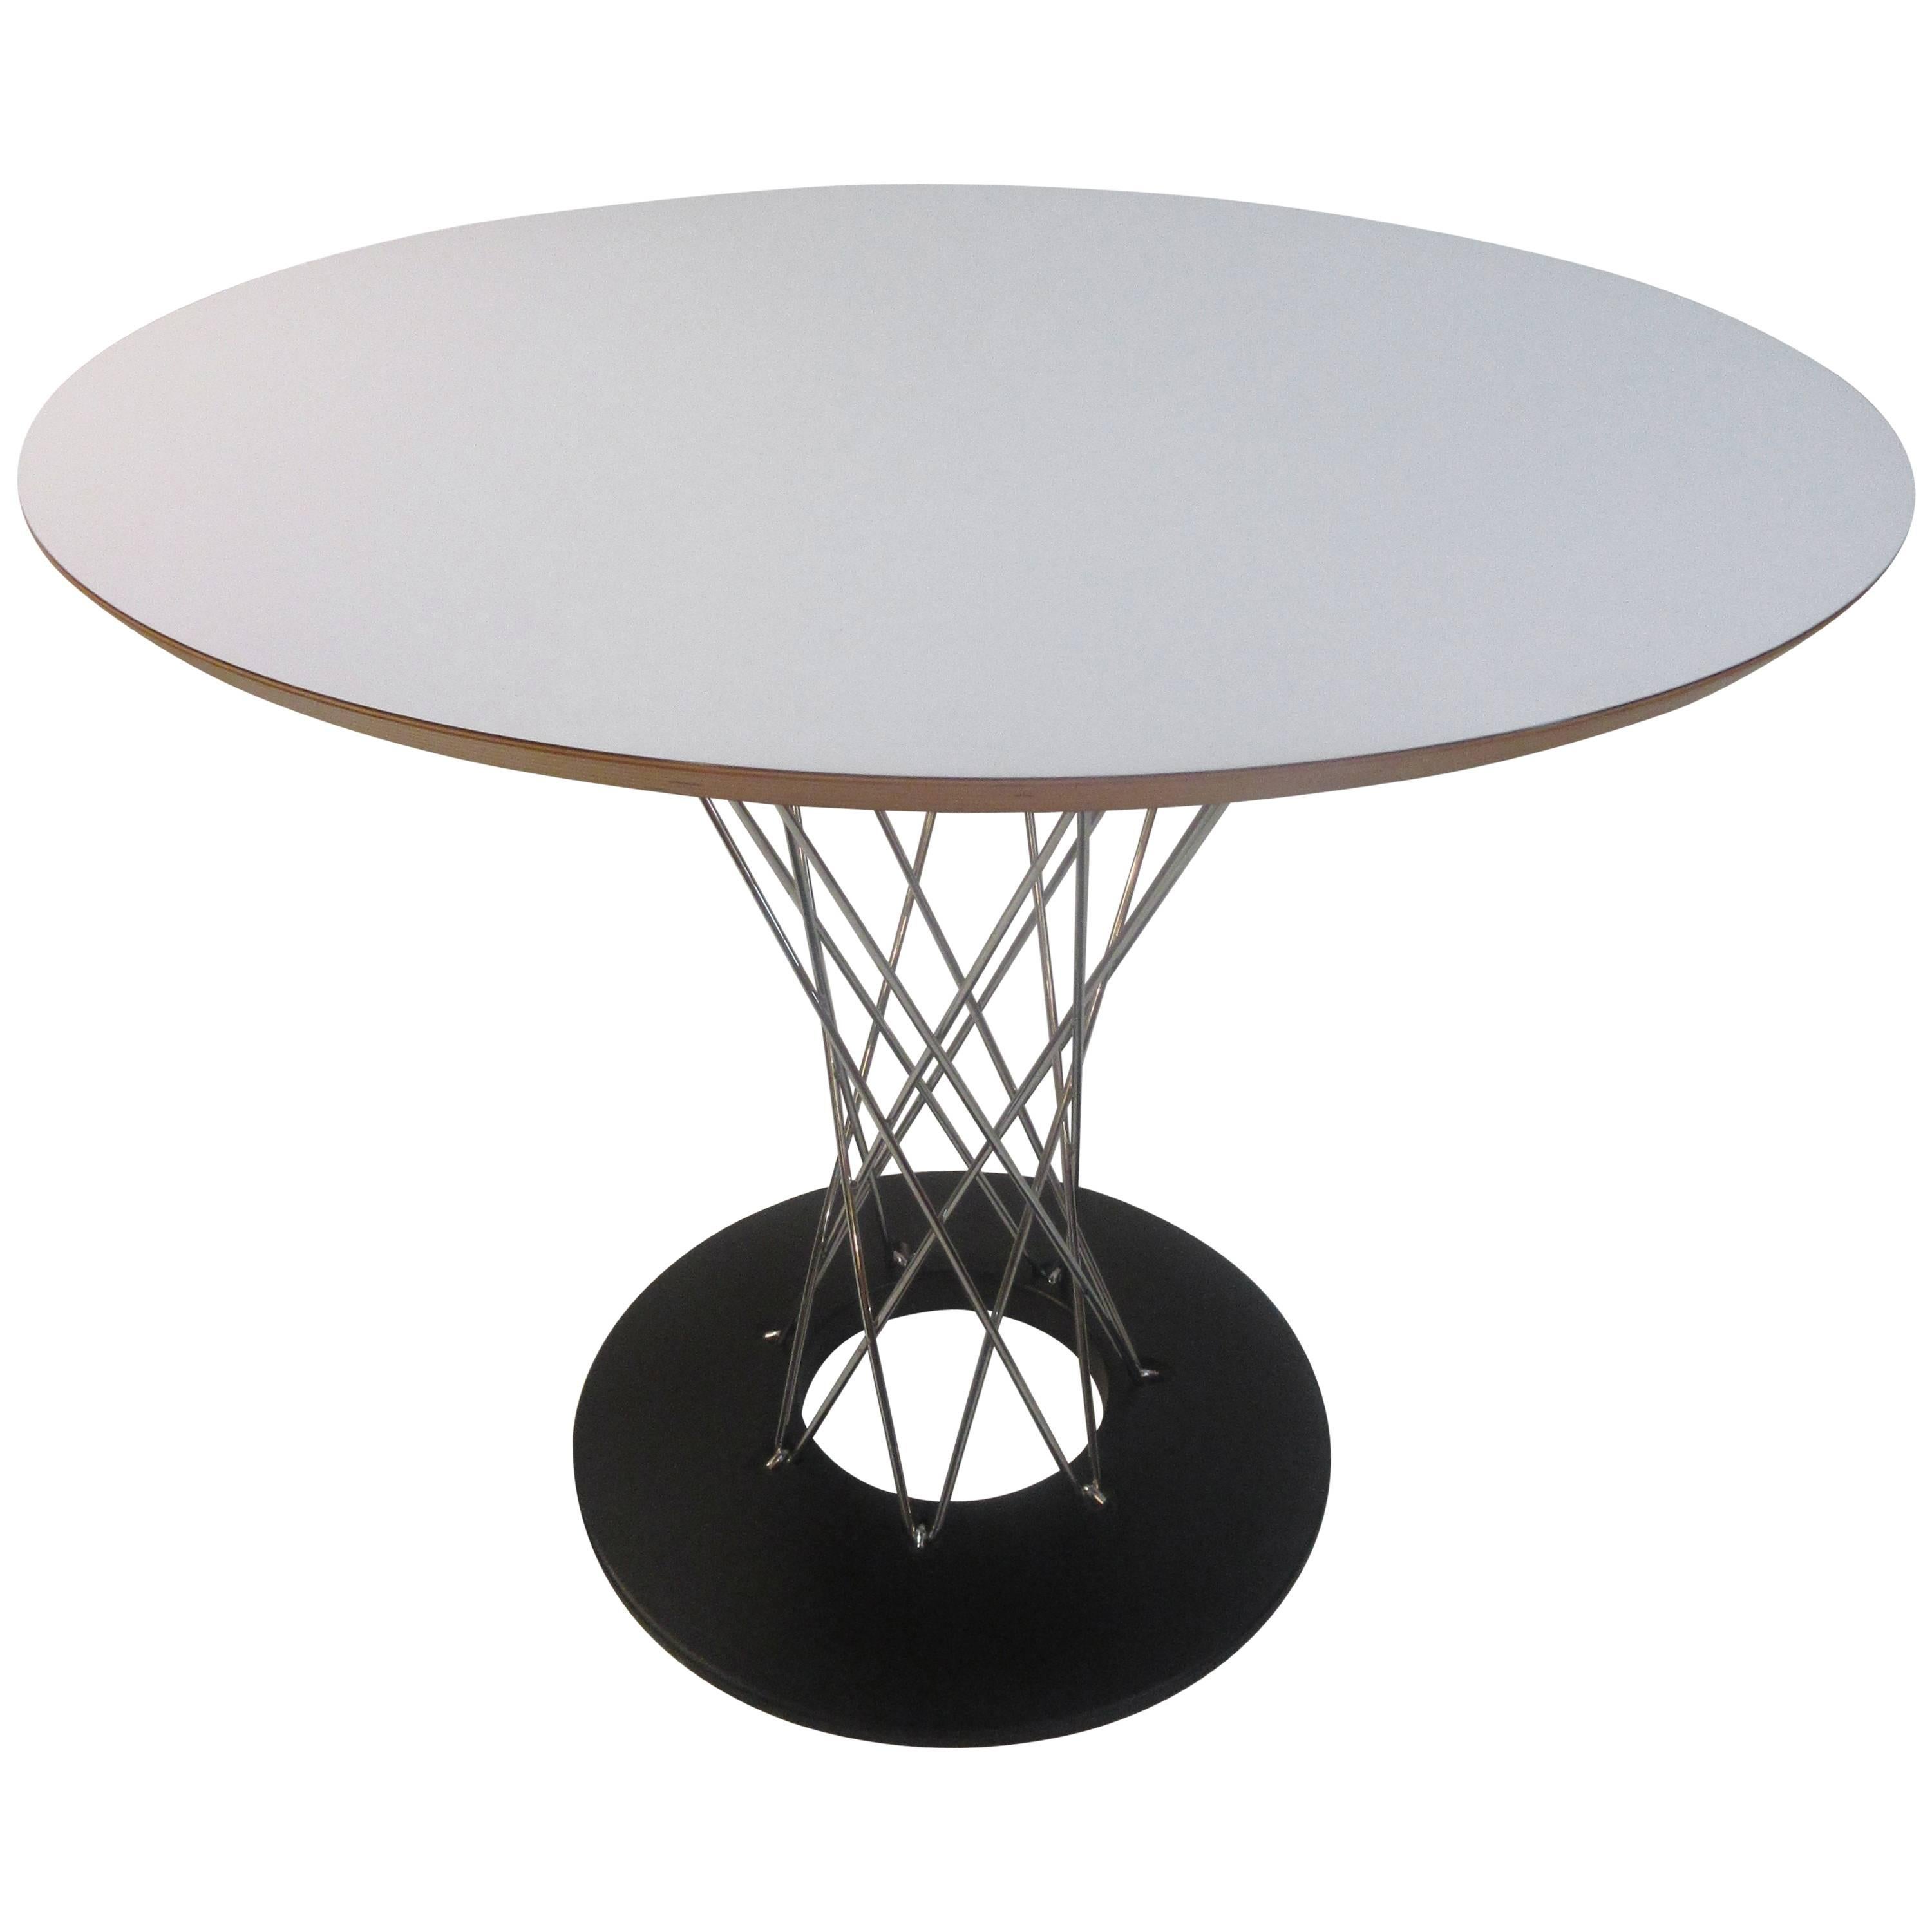 Isamu Noguchi Cyclone Dining Table for Knoll